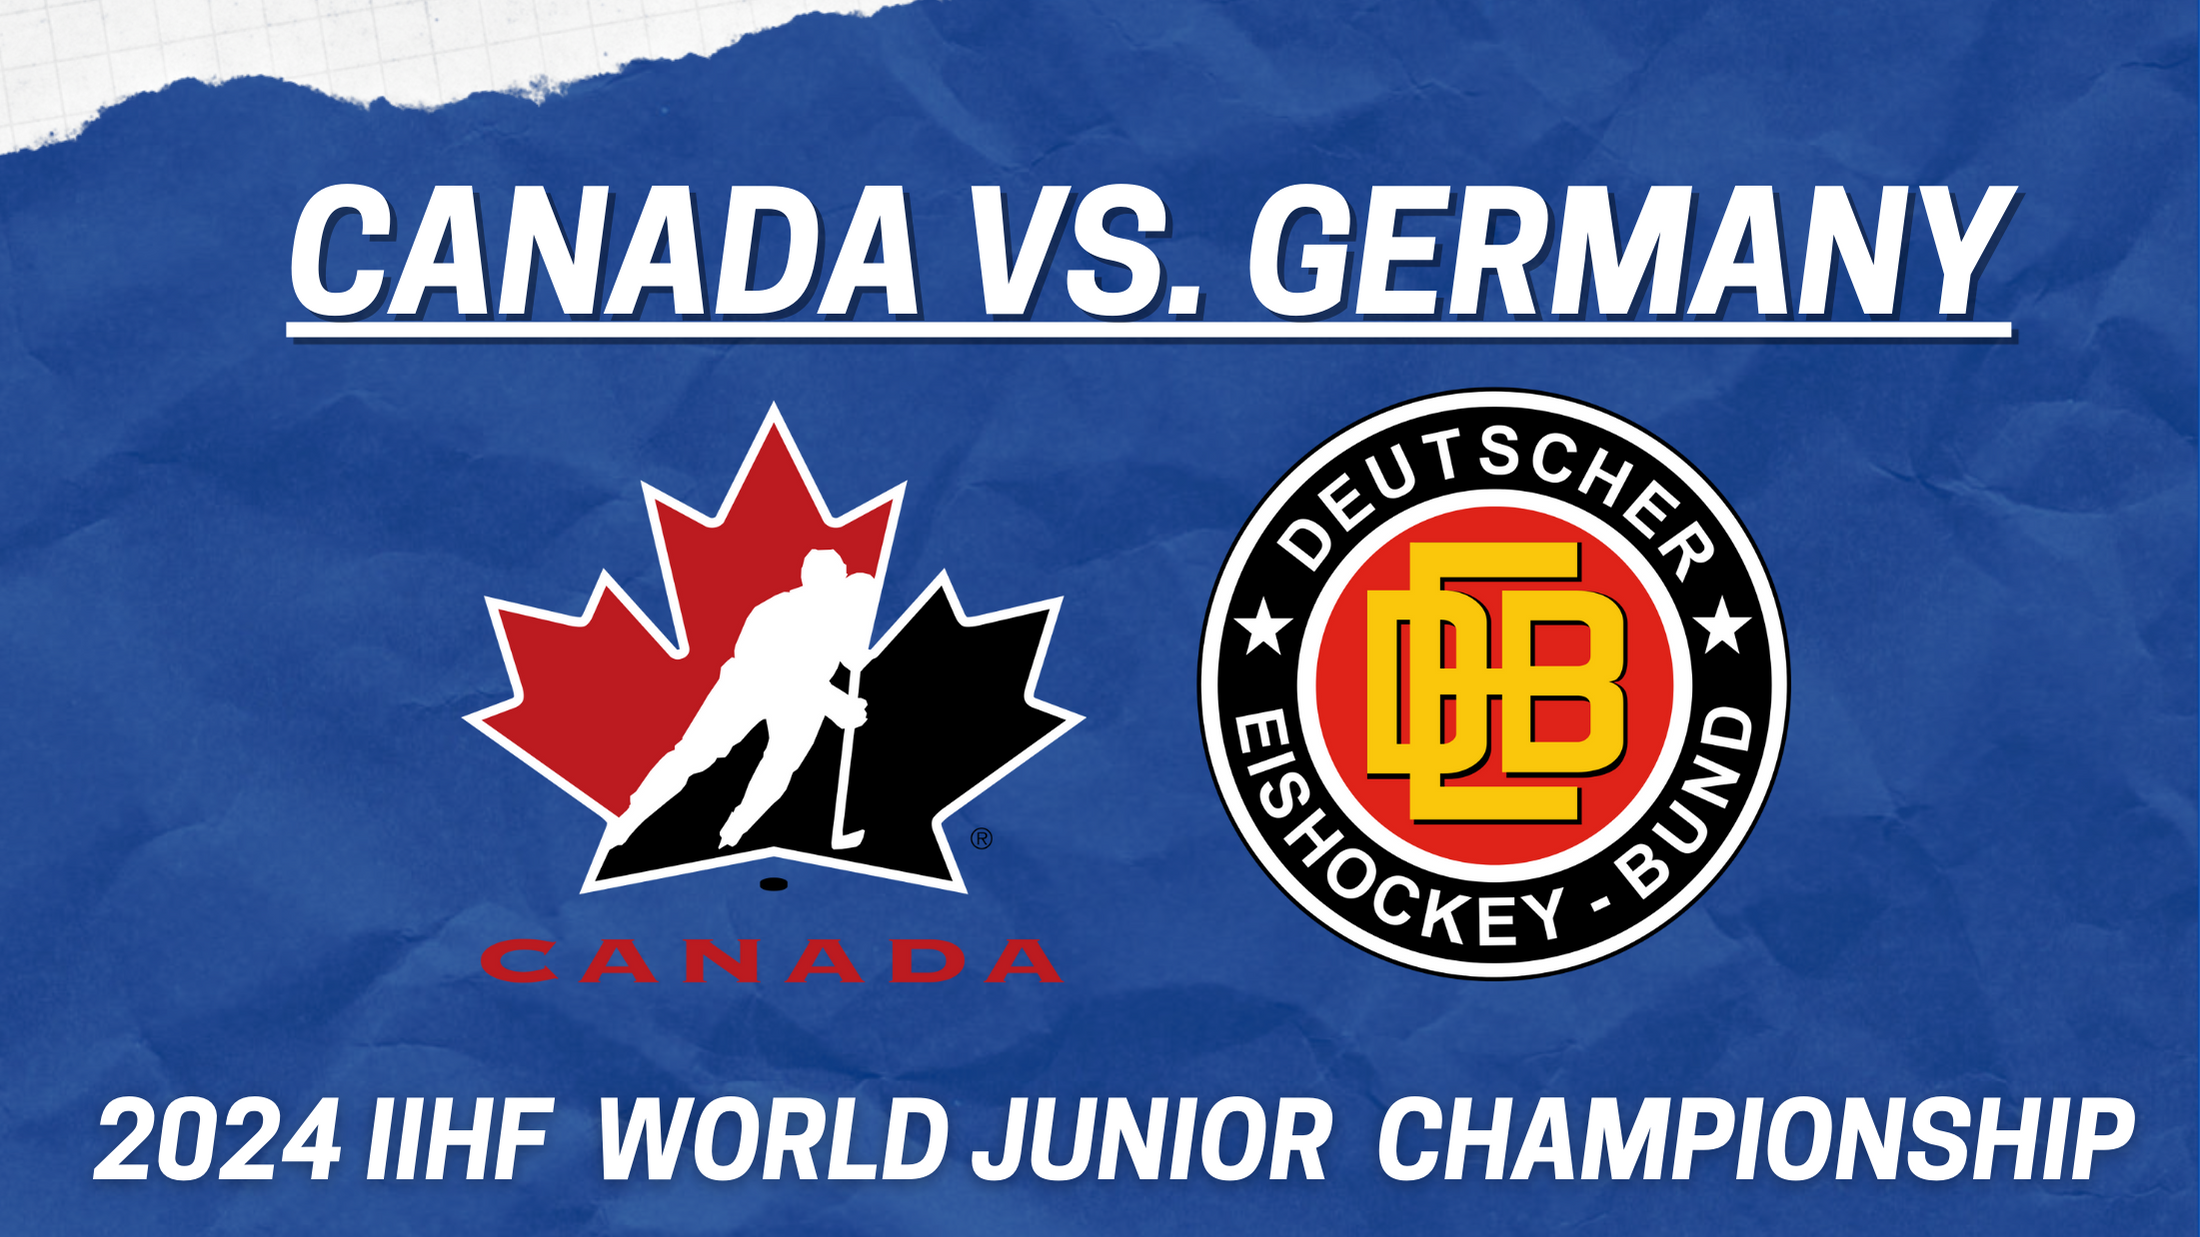 Top standouts from Canada vs. Germany at 2024 World Junior Championship